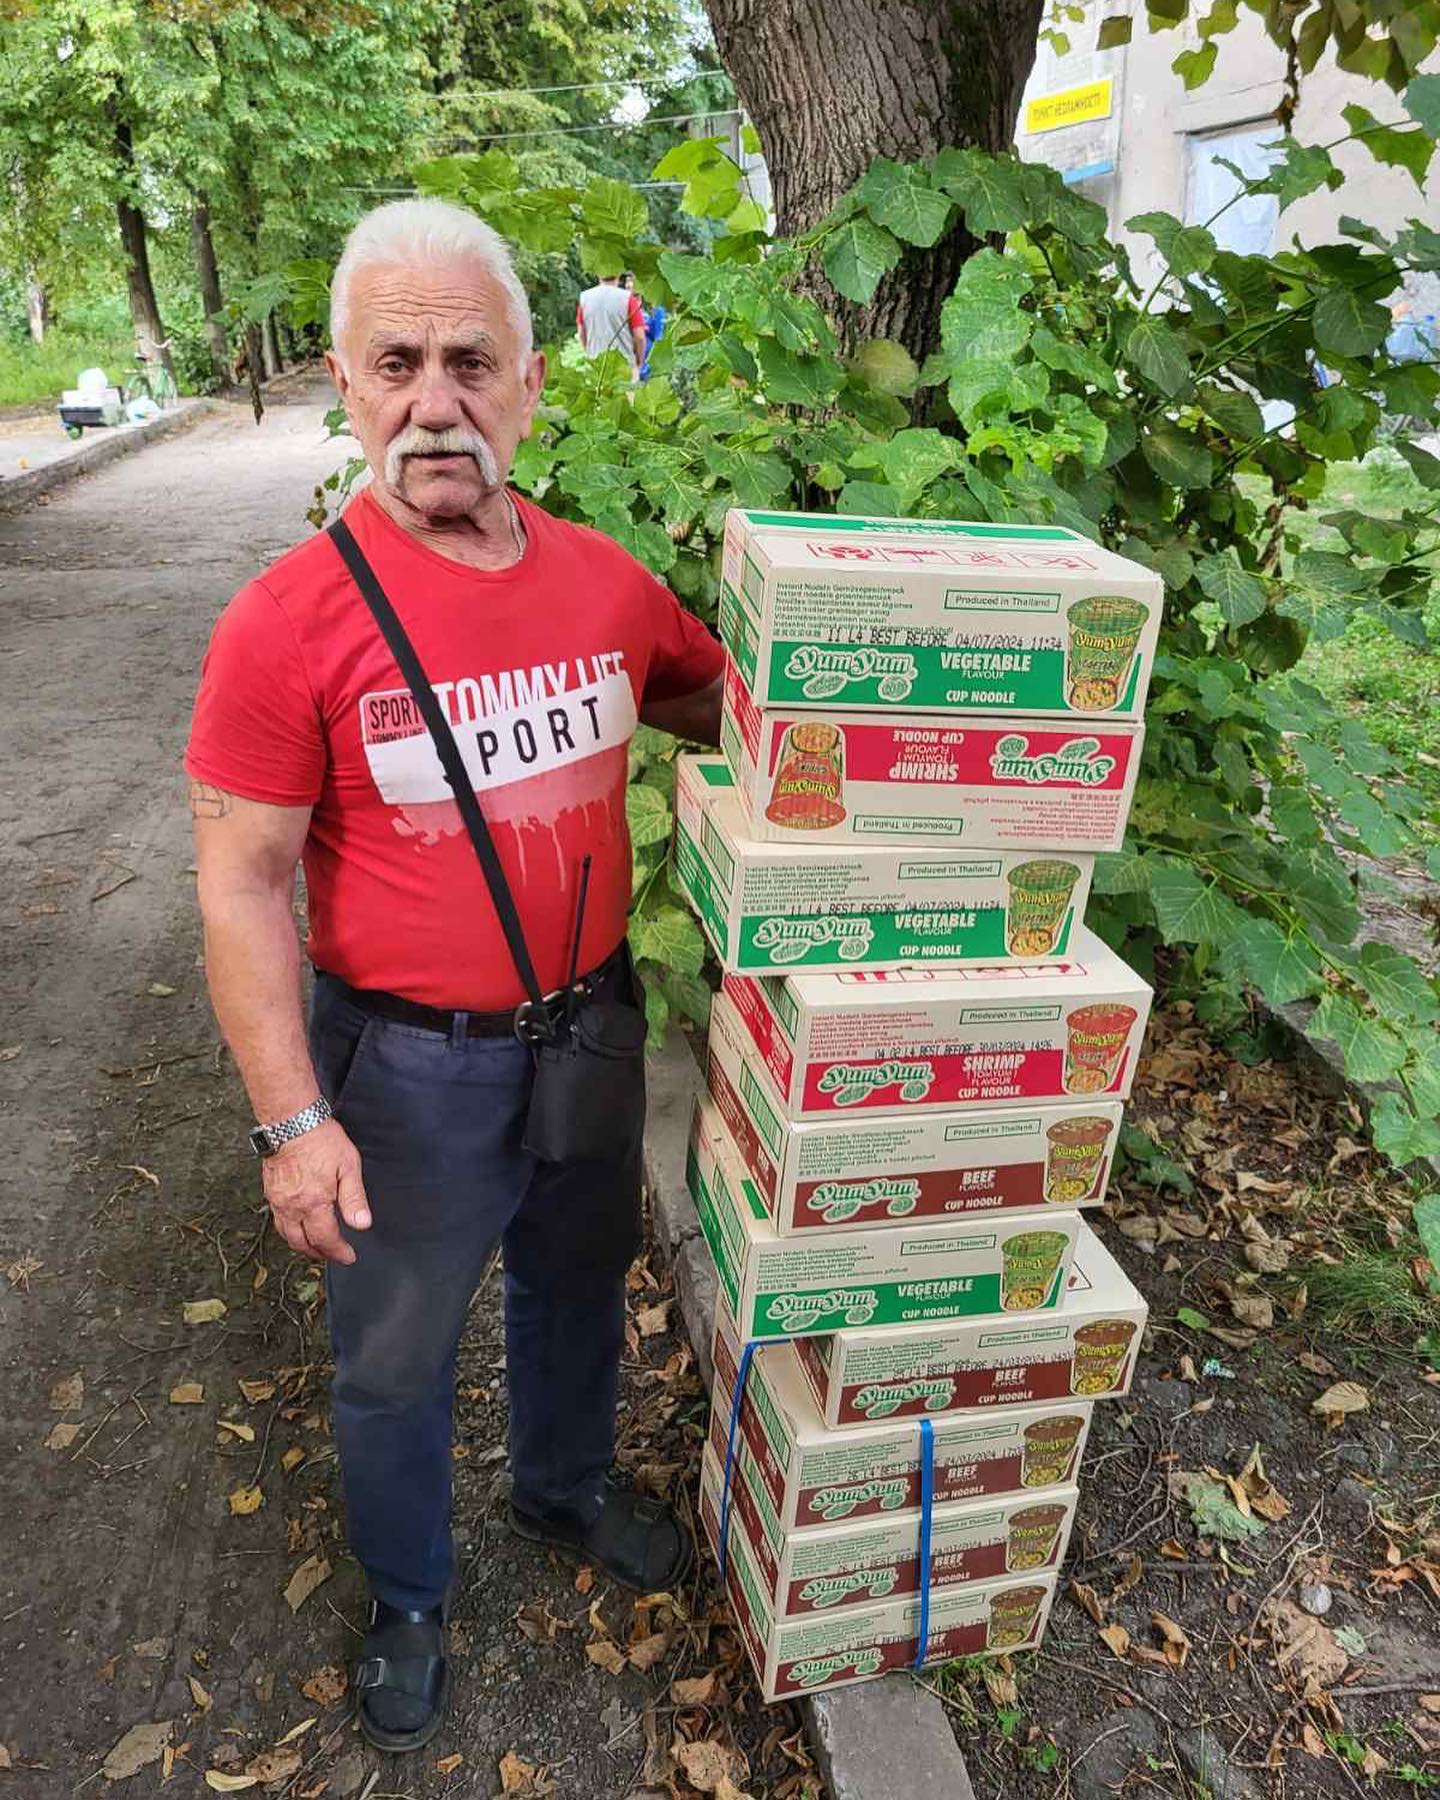 A man standing next to a stack of pizza boxes.